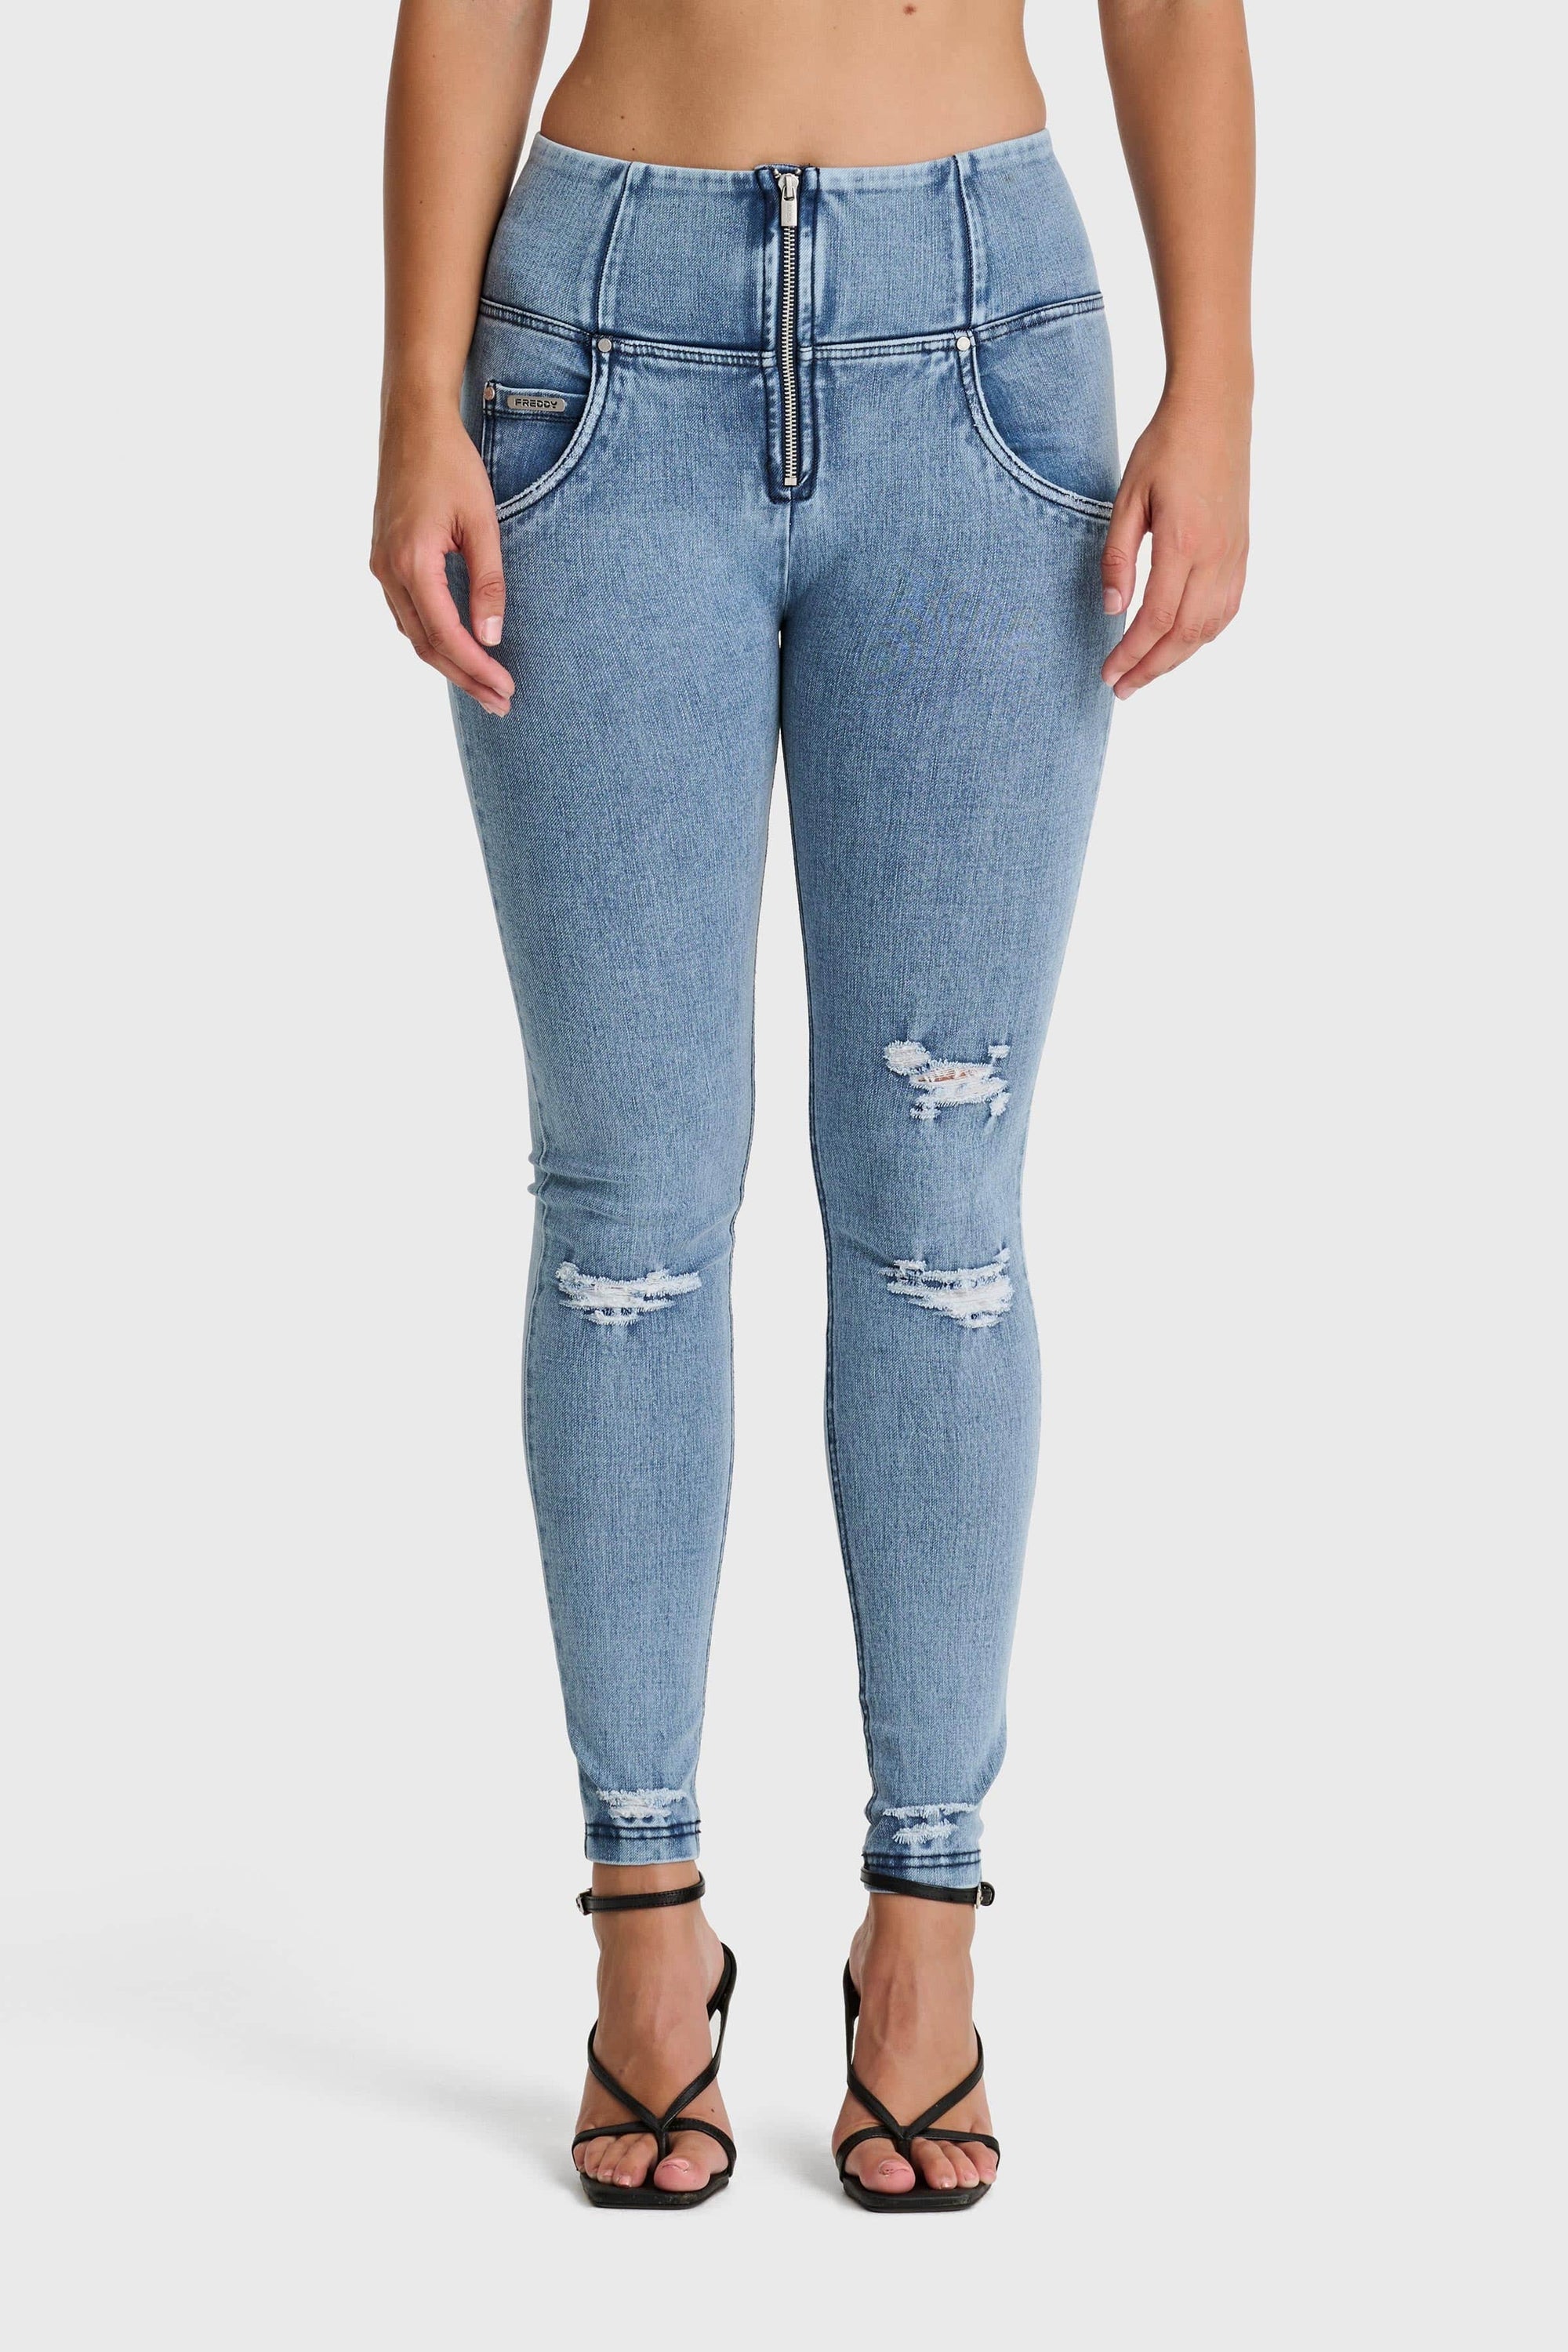 WR.UP® Snug Distressed Jeans - High Waisted - Full Length - Light Blue + Blue Stitching 1